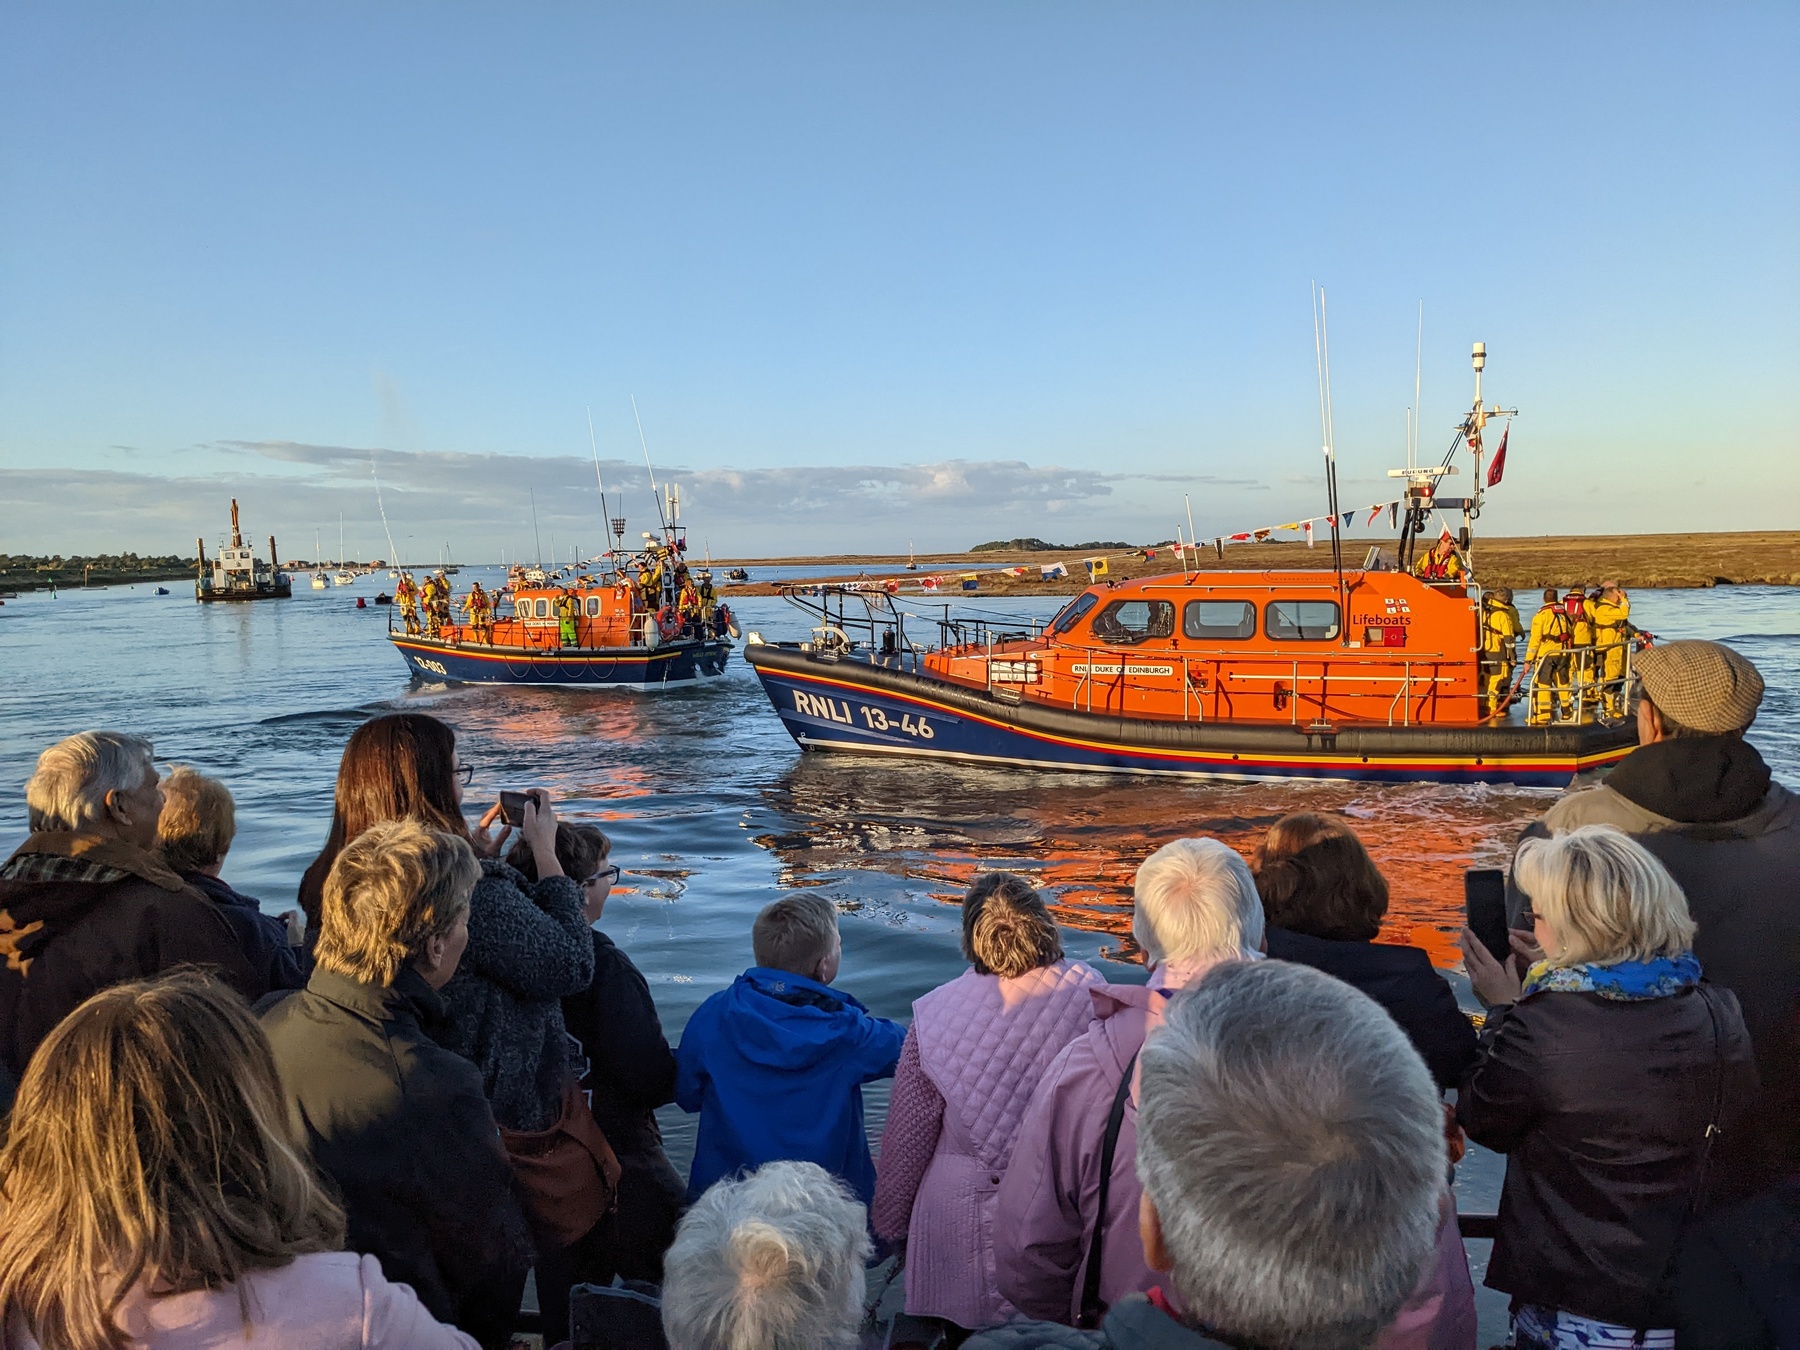 The new lifeboat welcomed by large crowd of townfolk, supporters and well-wishers on the quayside